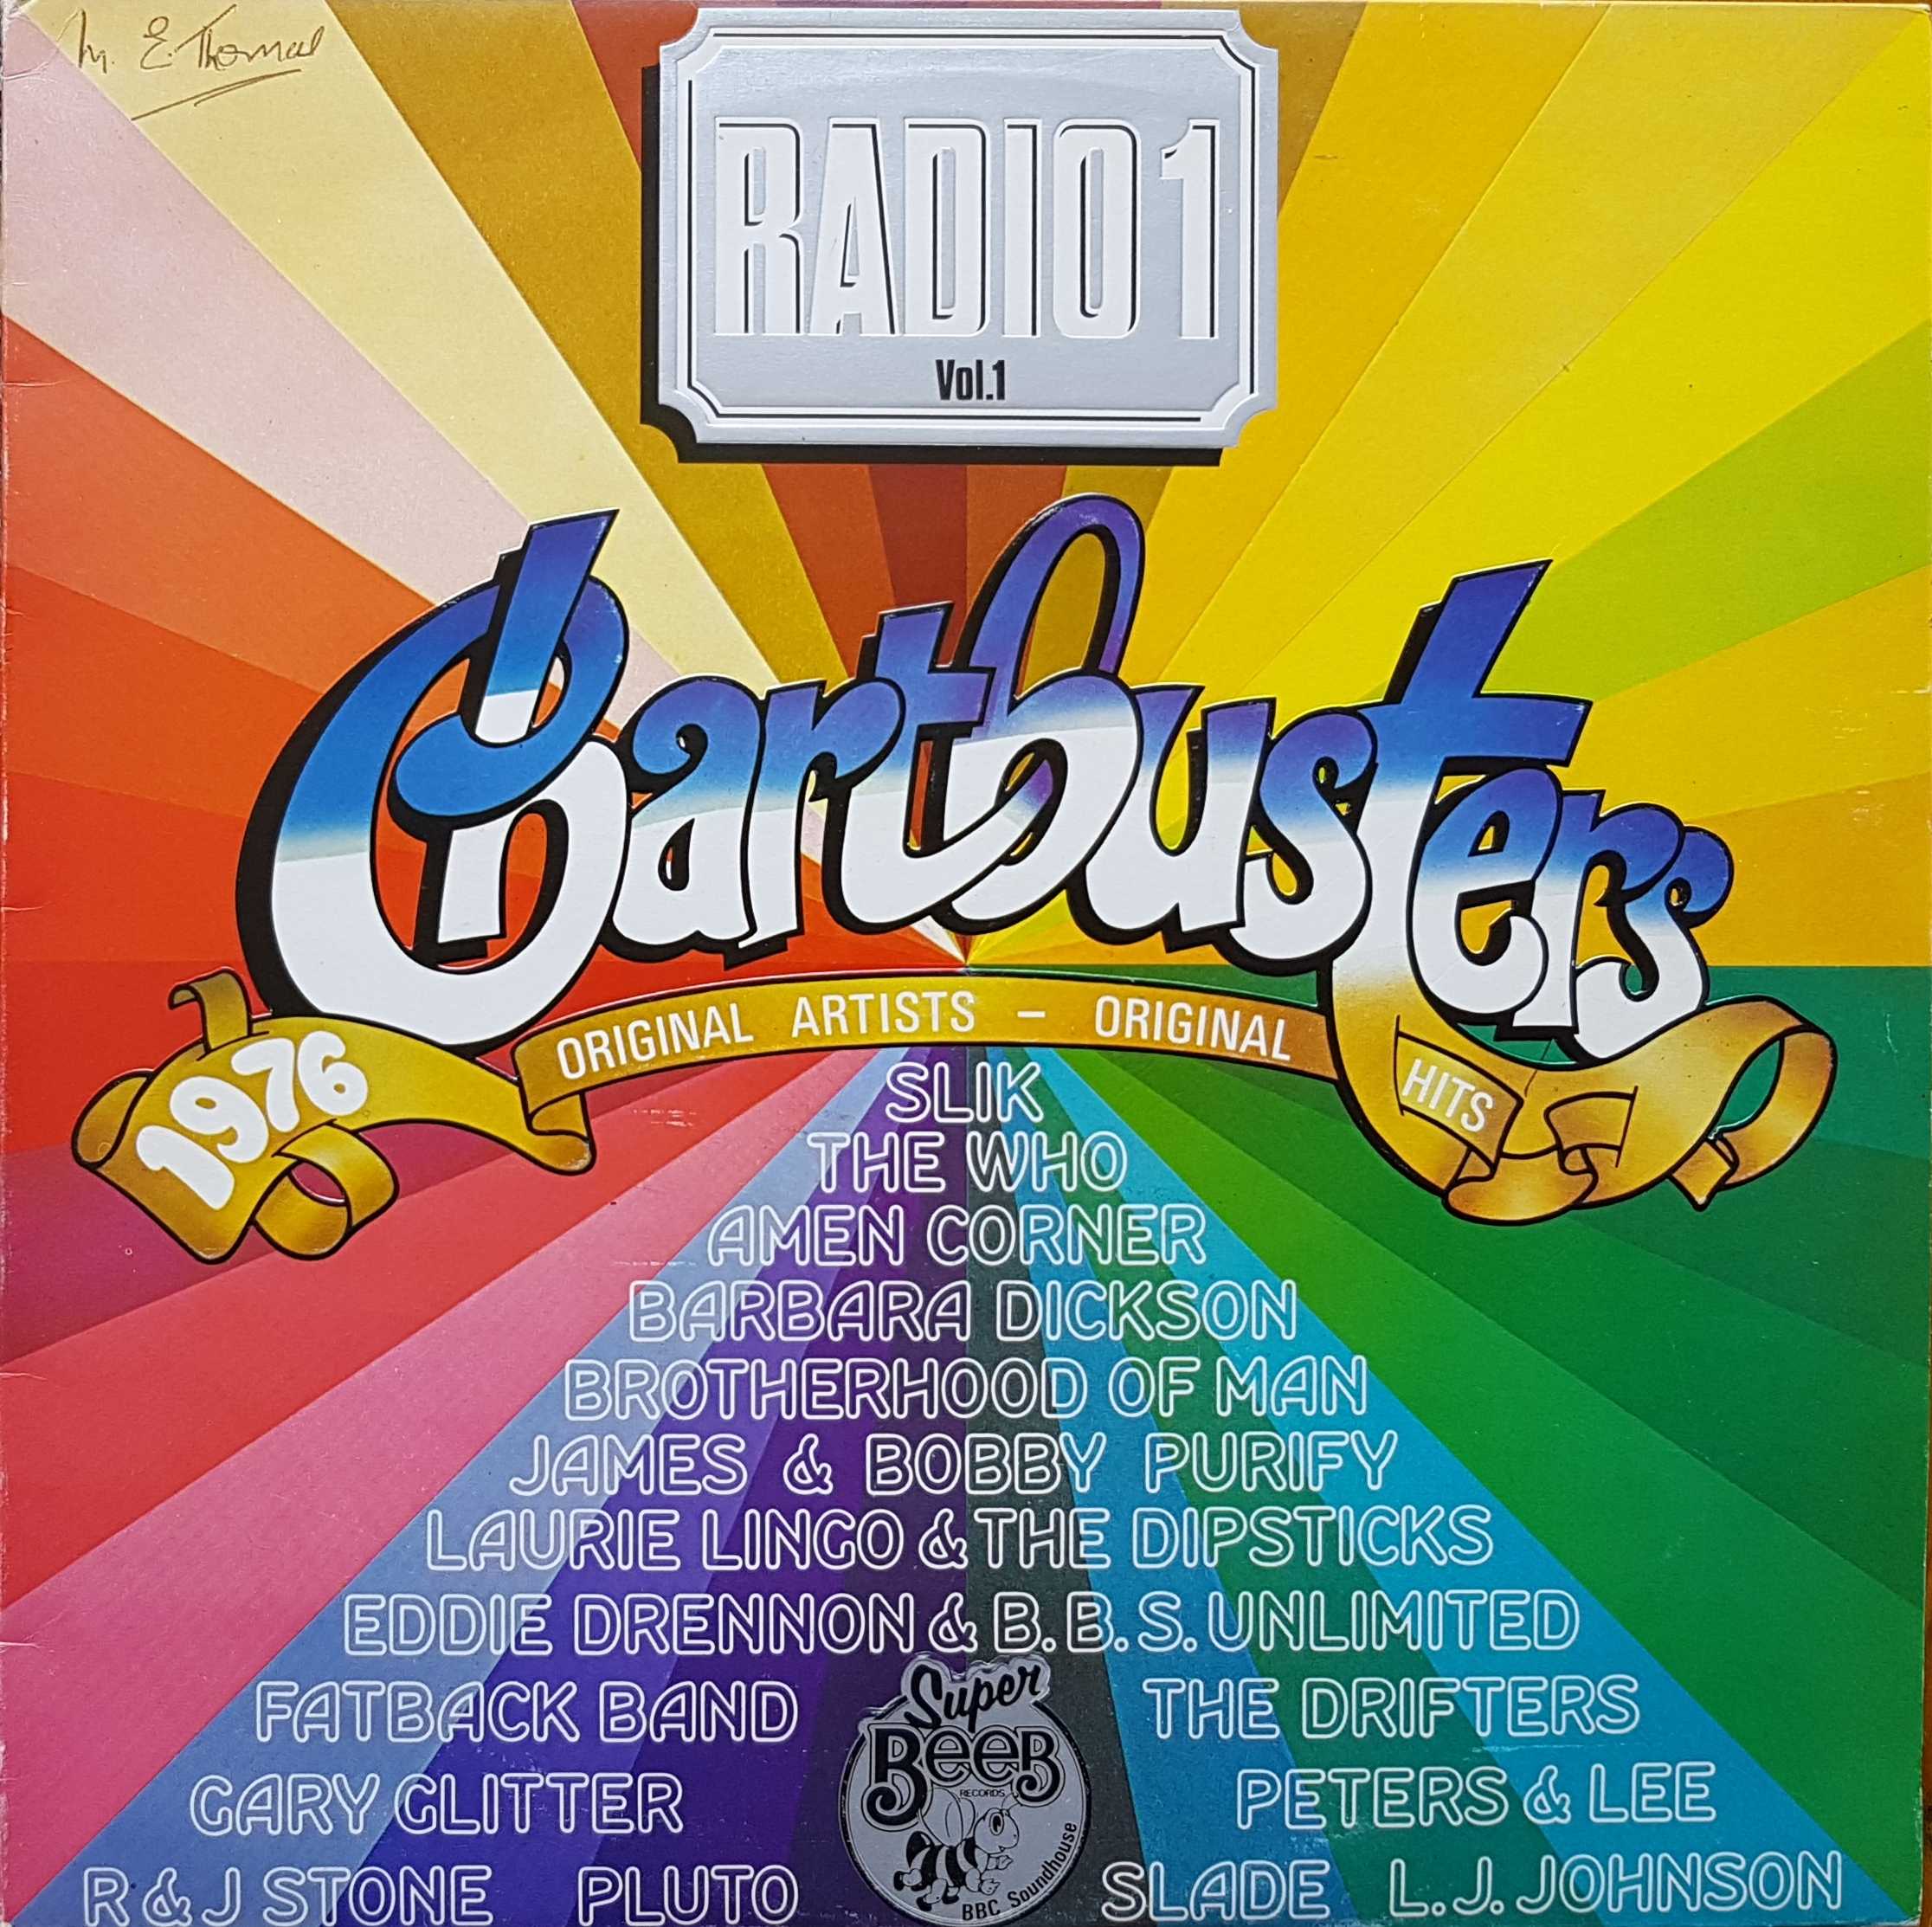 Picture of Radio 1 chartbusters  by artist Various from the BBC albums - Records and Tapes library